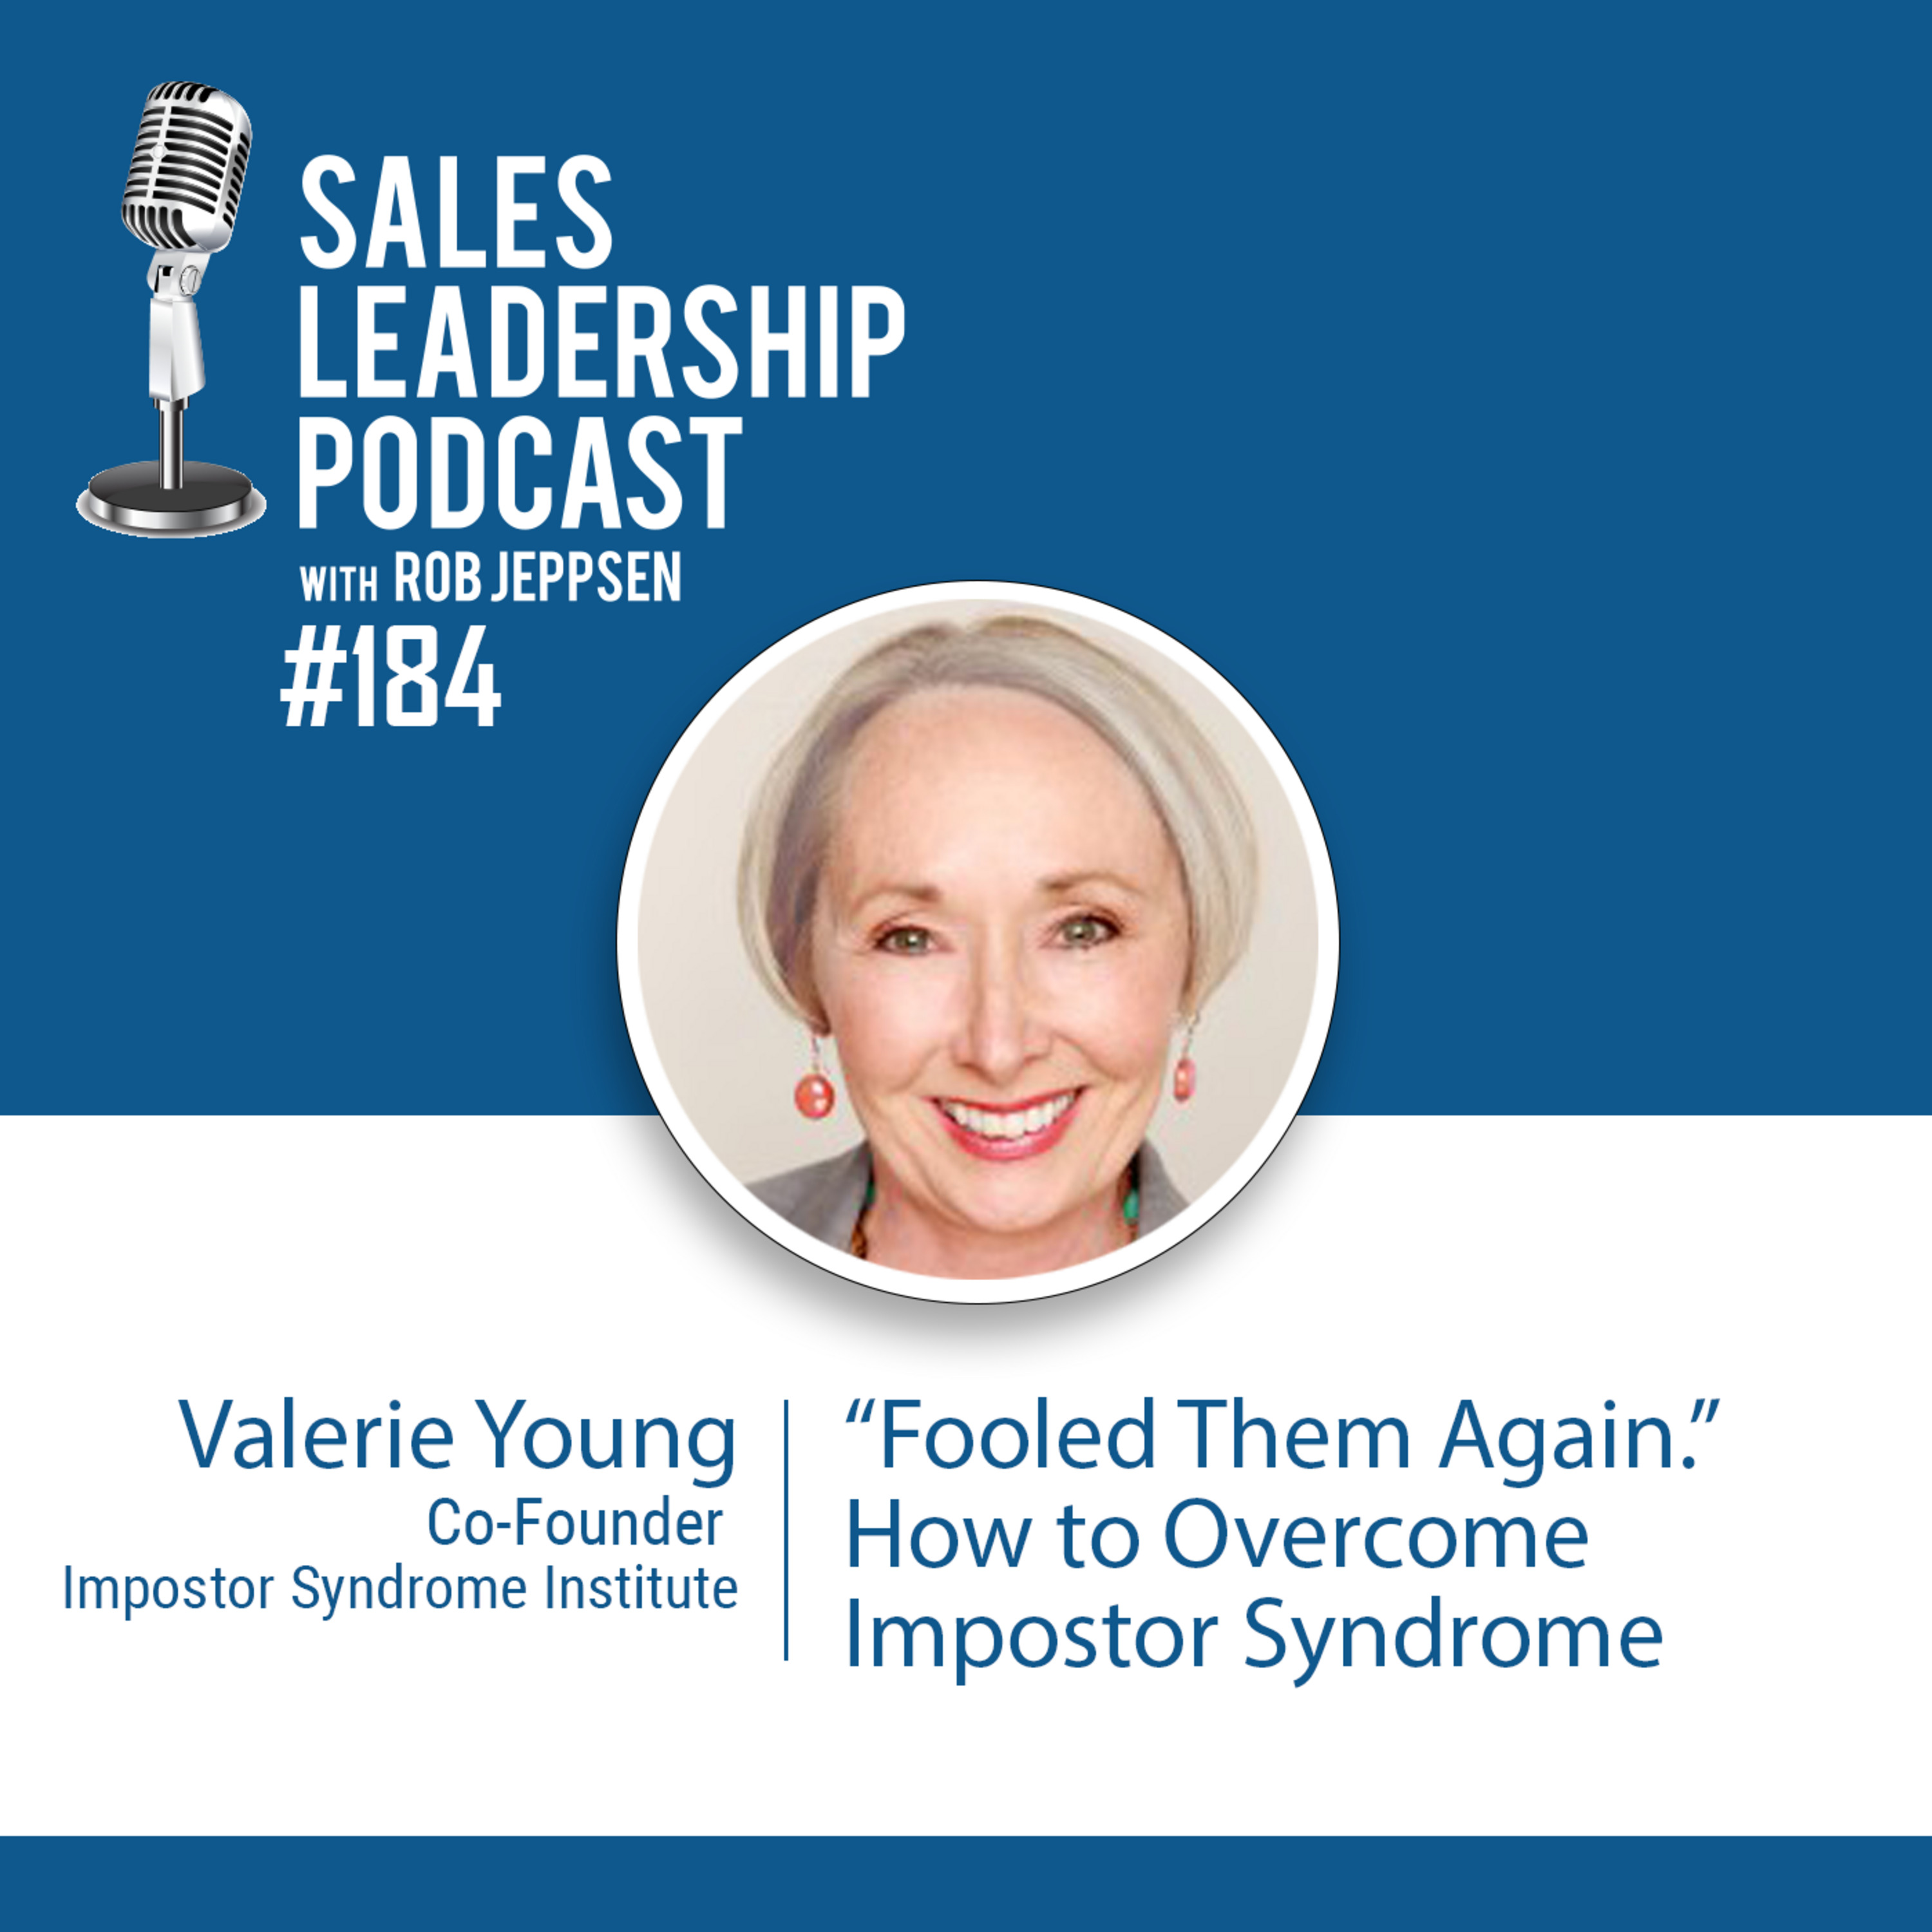 Episode 185: #184: Valerie Young of Impostor Syndrome Institute — How to Overcome Impostor Syndrome